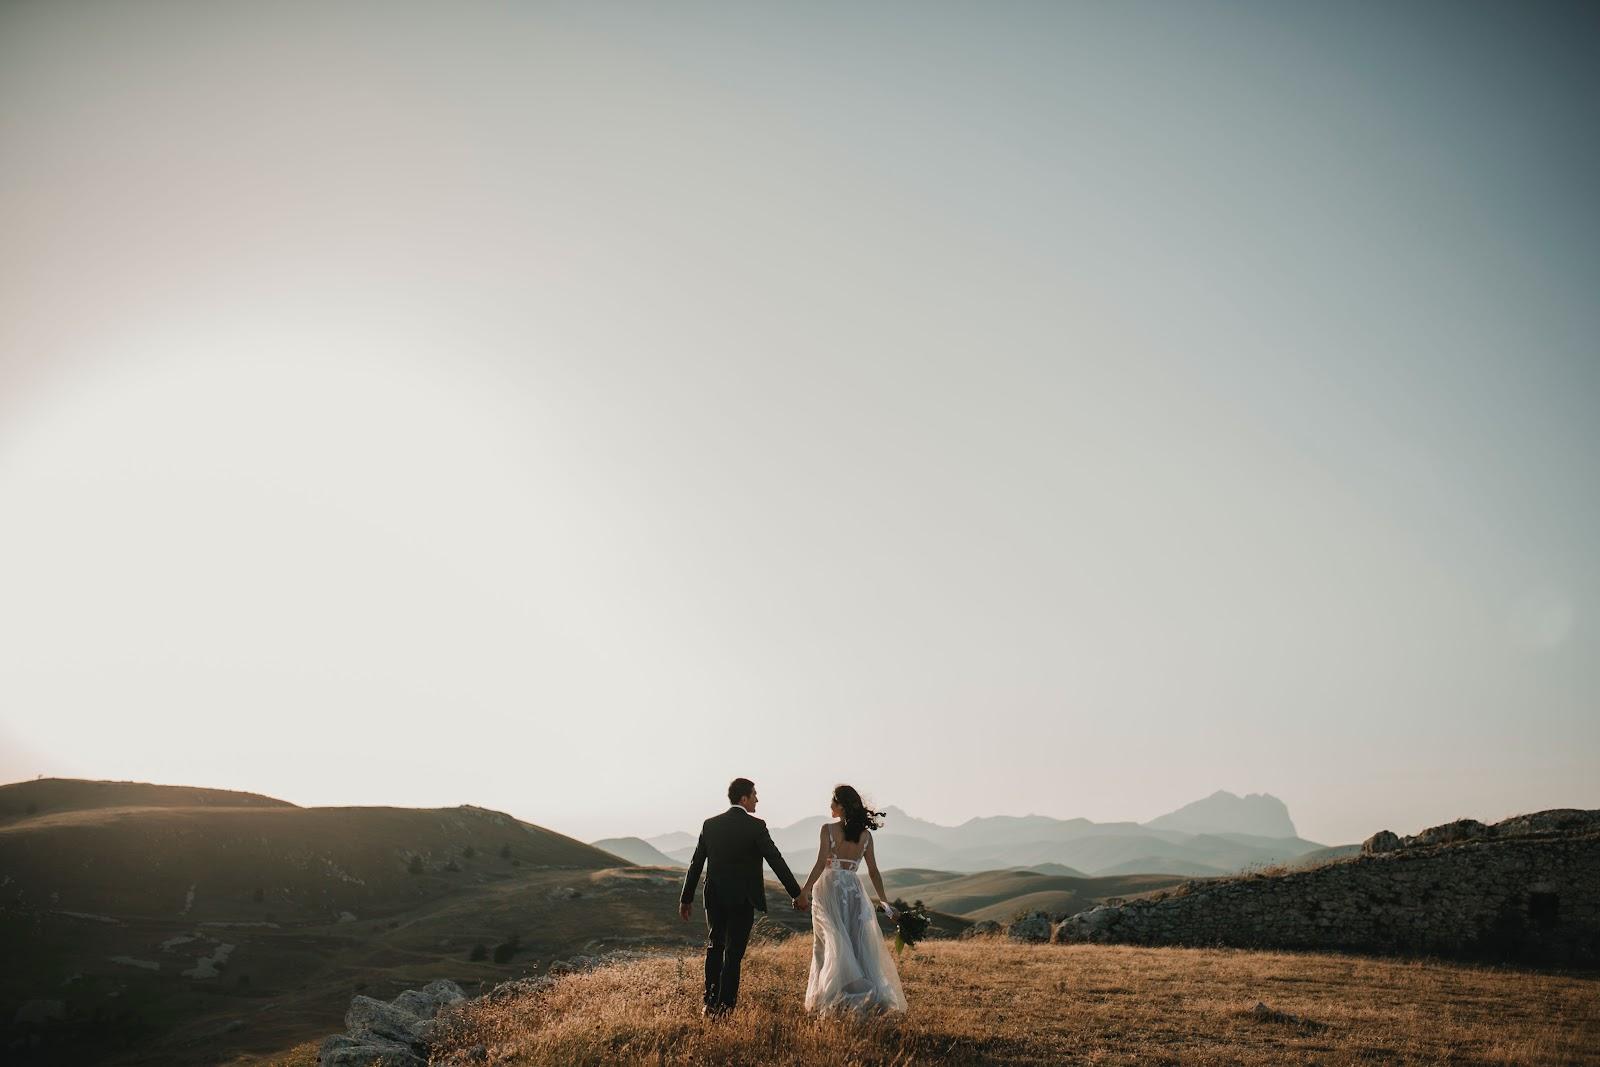 How Long Should A Wedding Video Be